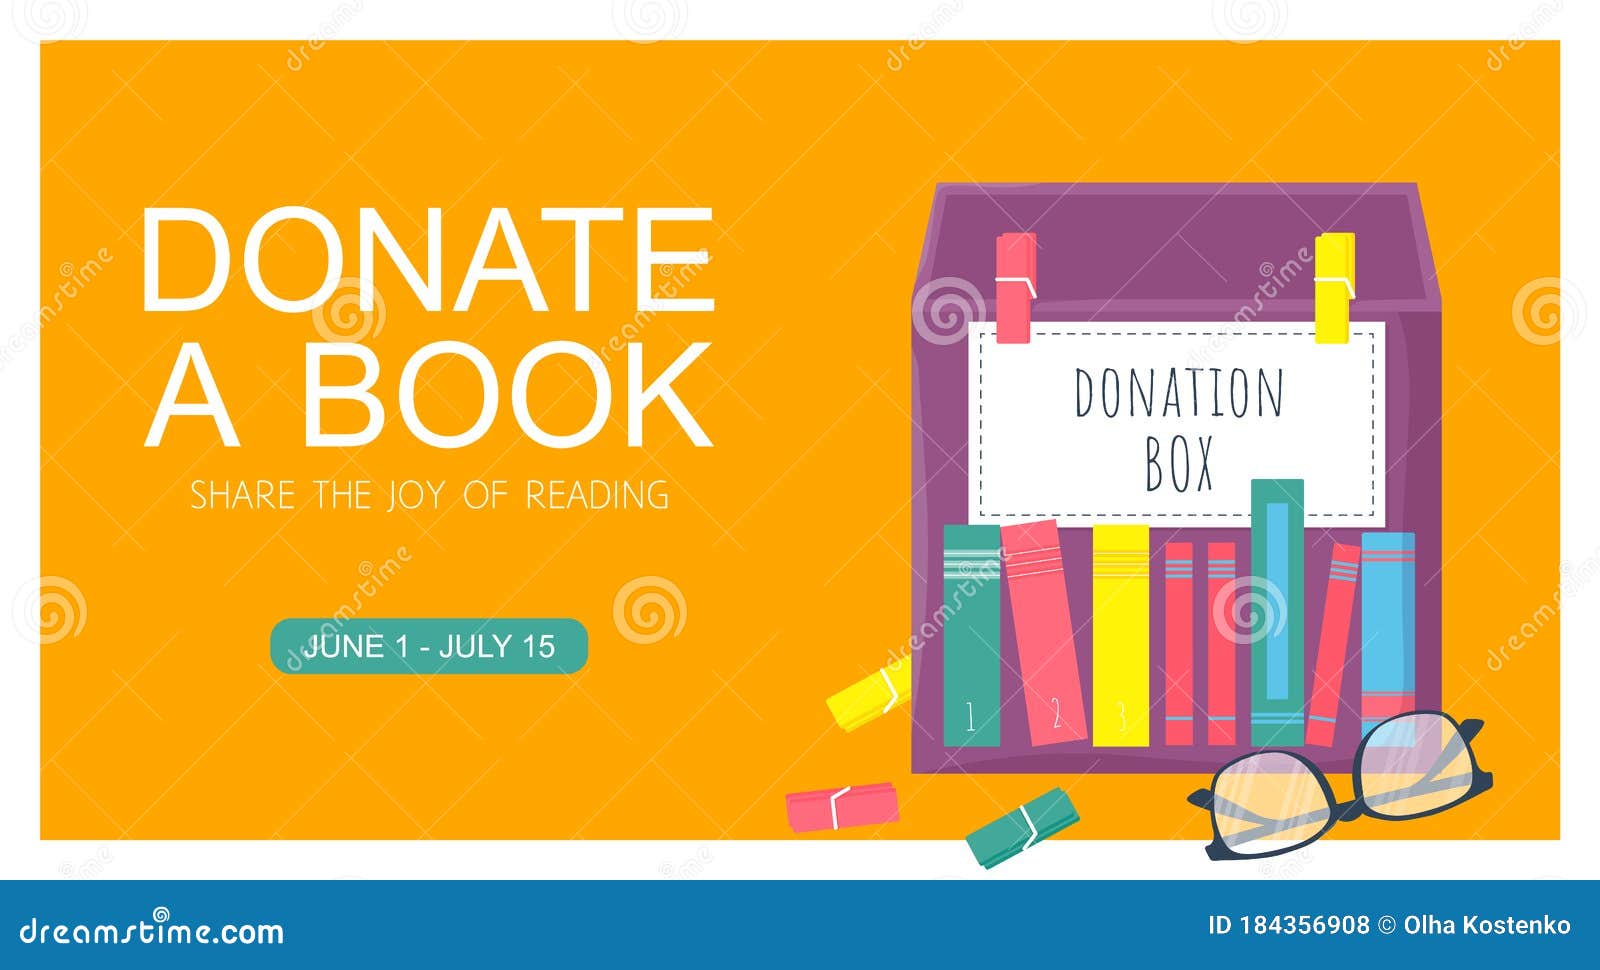 Template Poster With Box For Donation Book Stock Vector With Donation Card Template Free